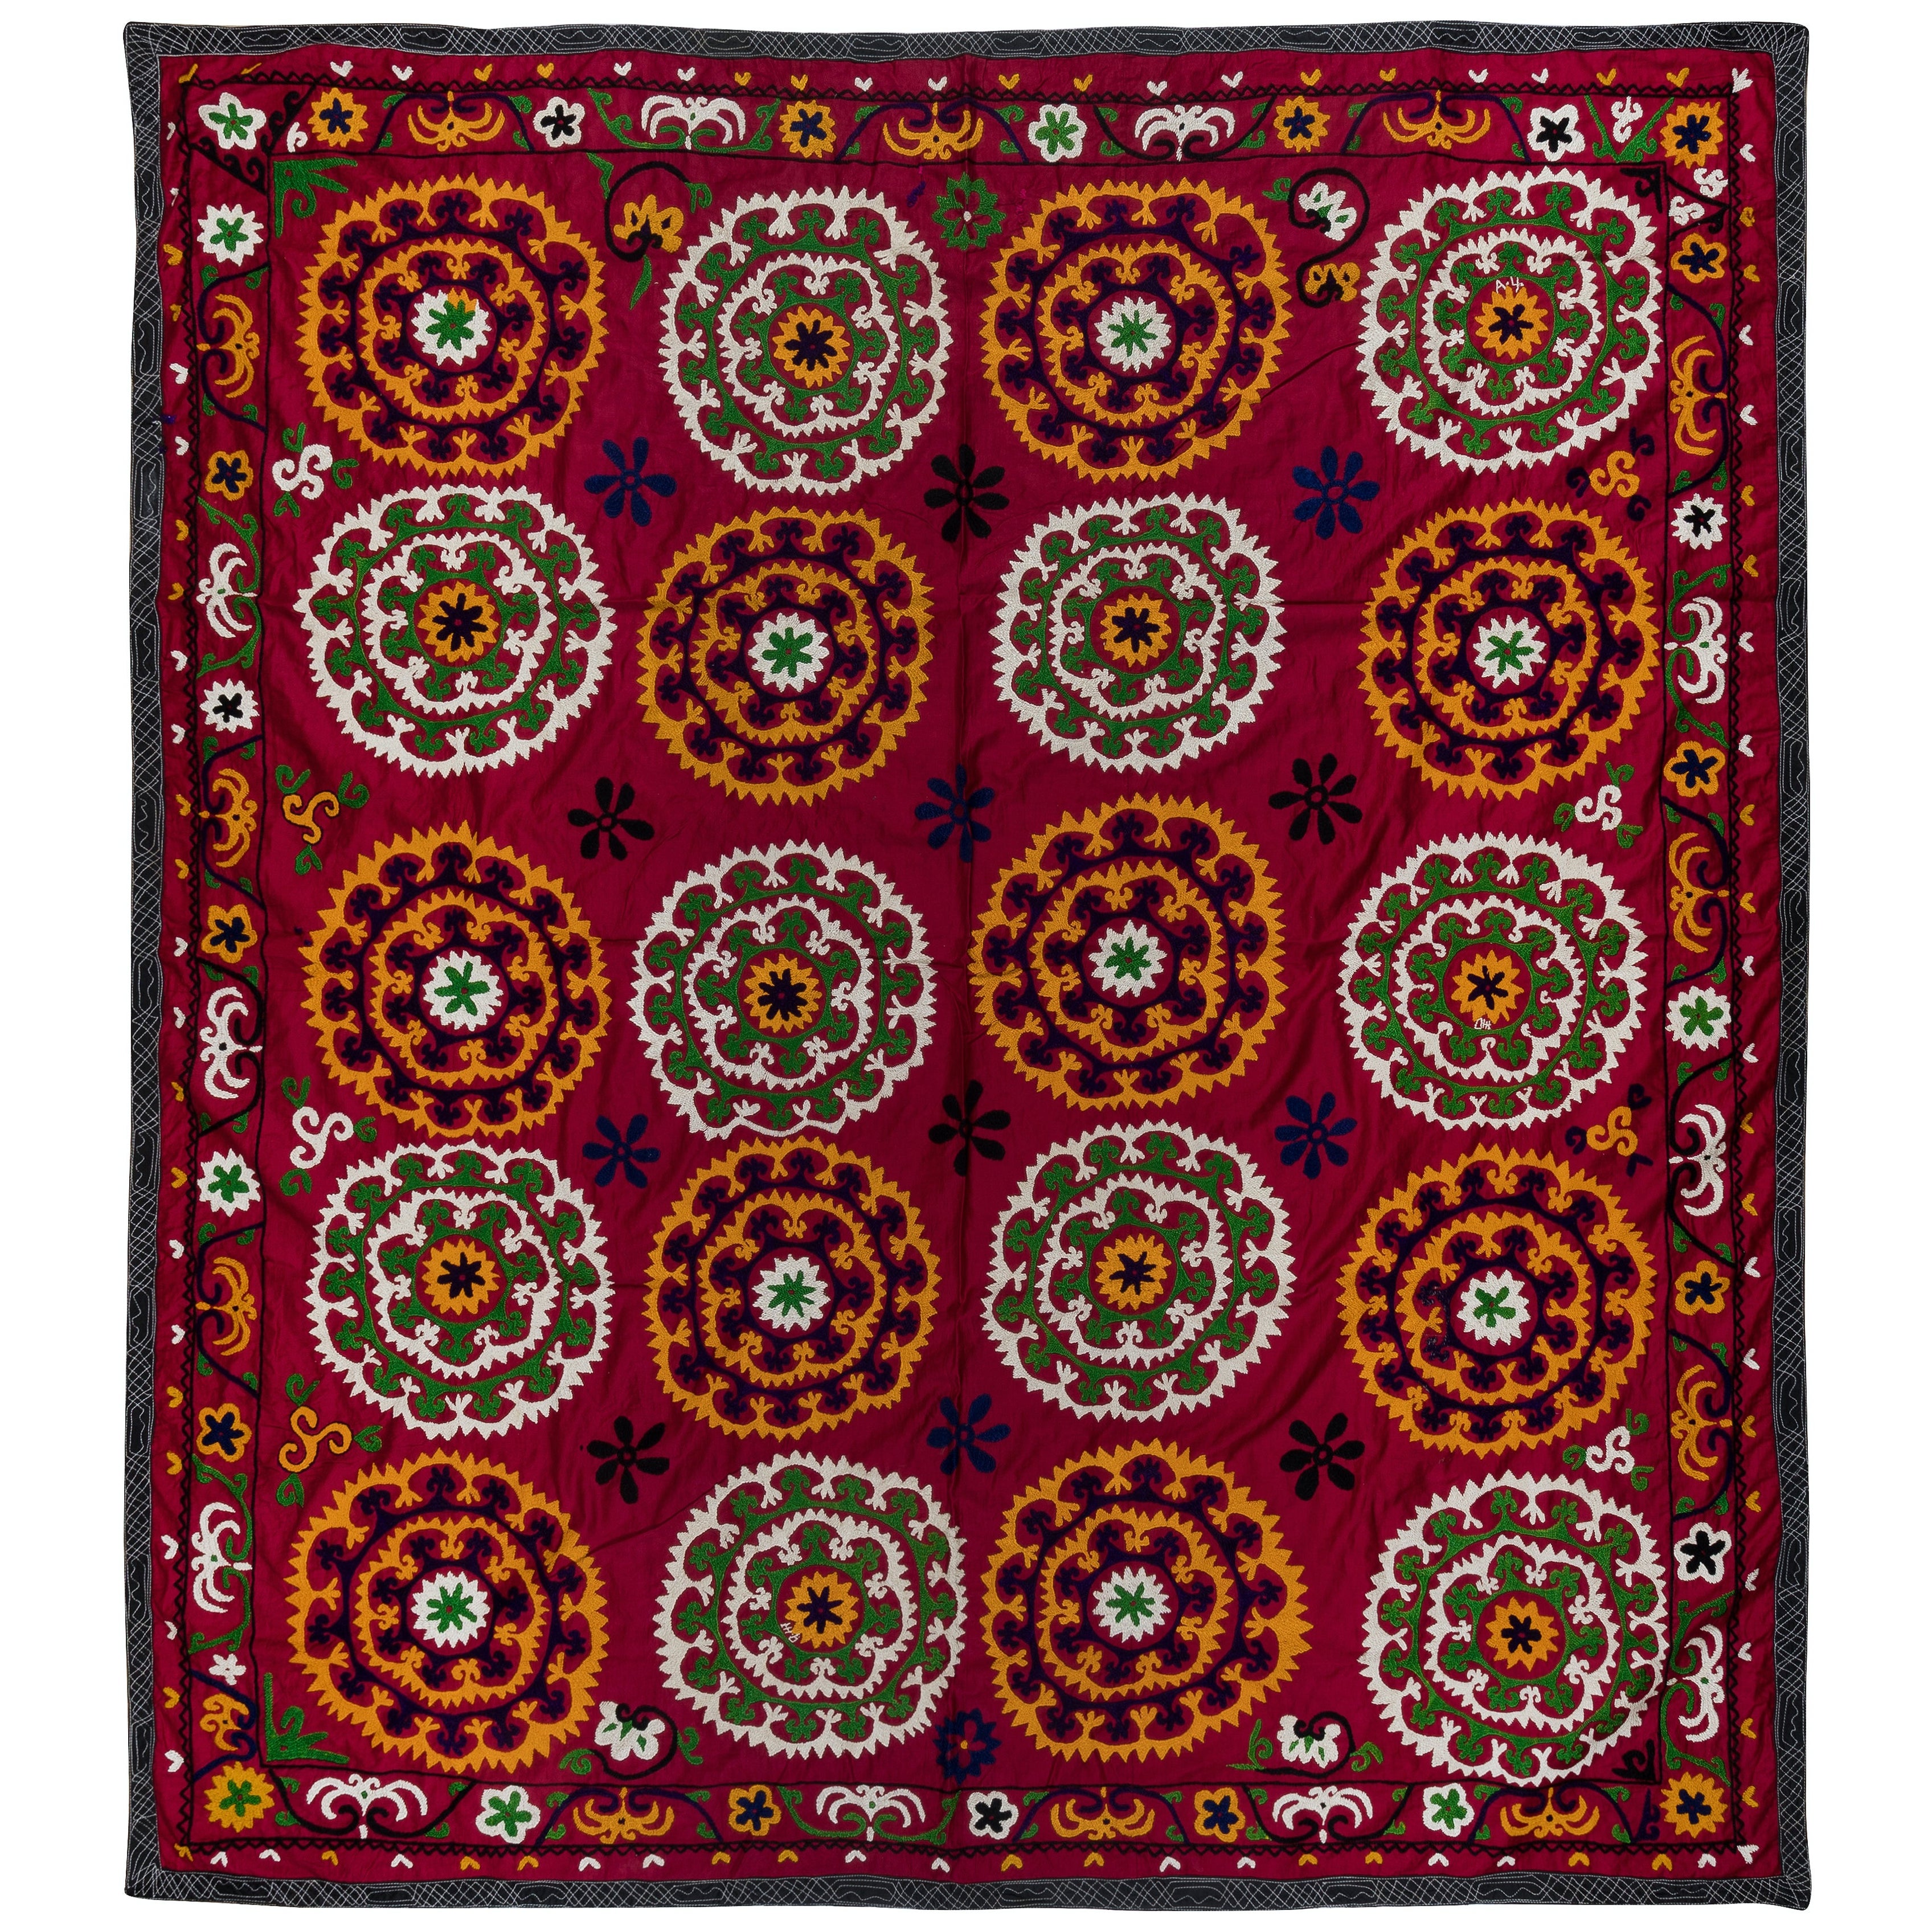 5.9x6.6 ft Unique Silk Suzani Wall Hanging, Vintage Embroidered Red Bed Cover